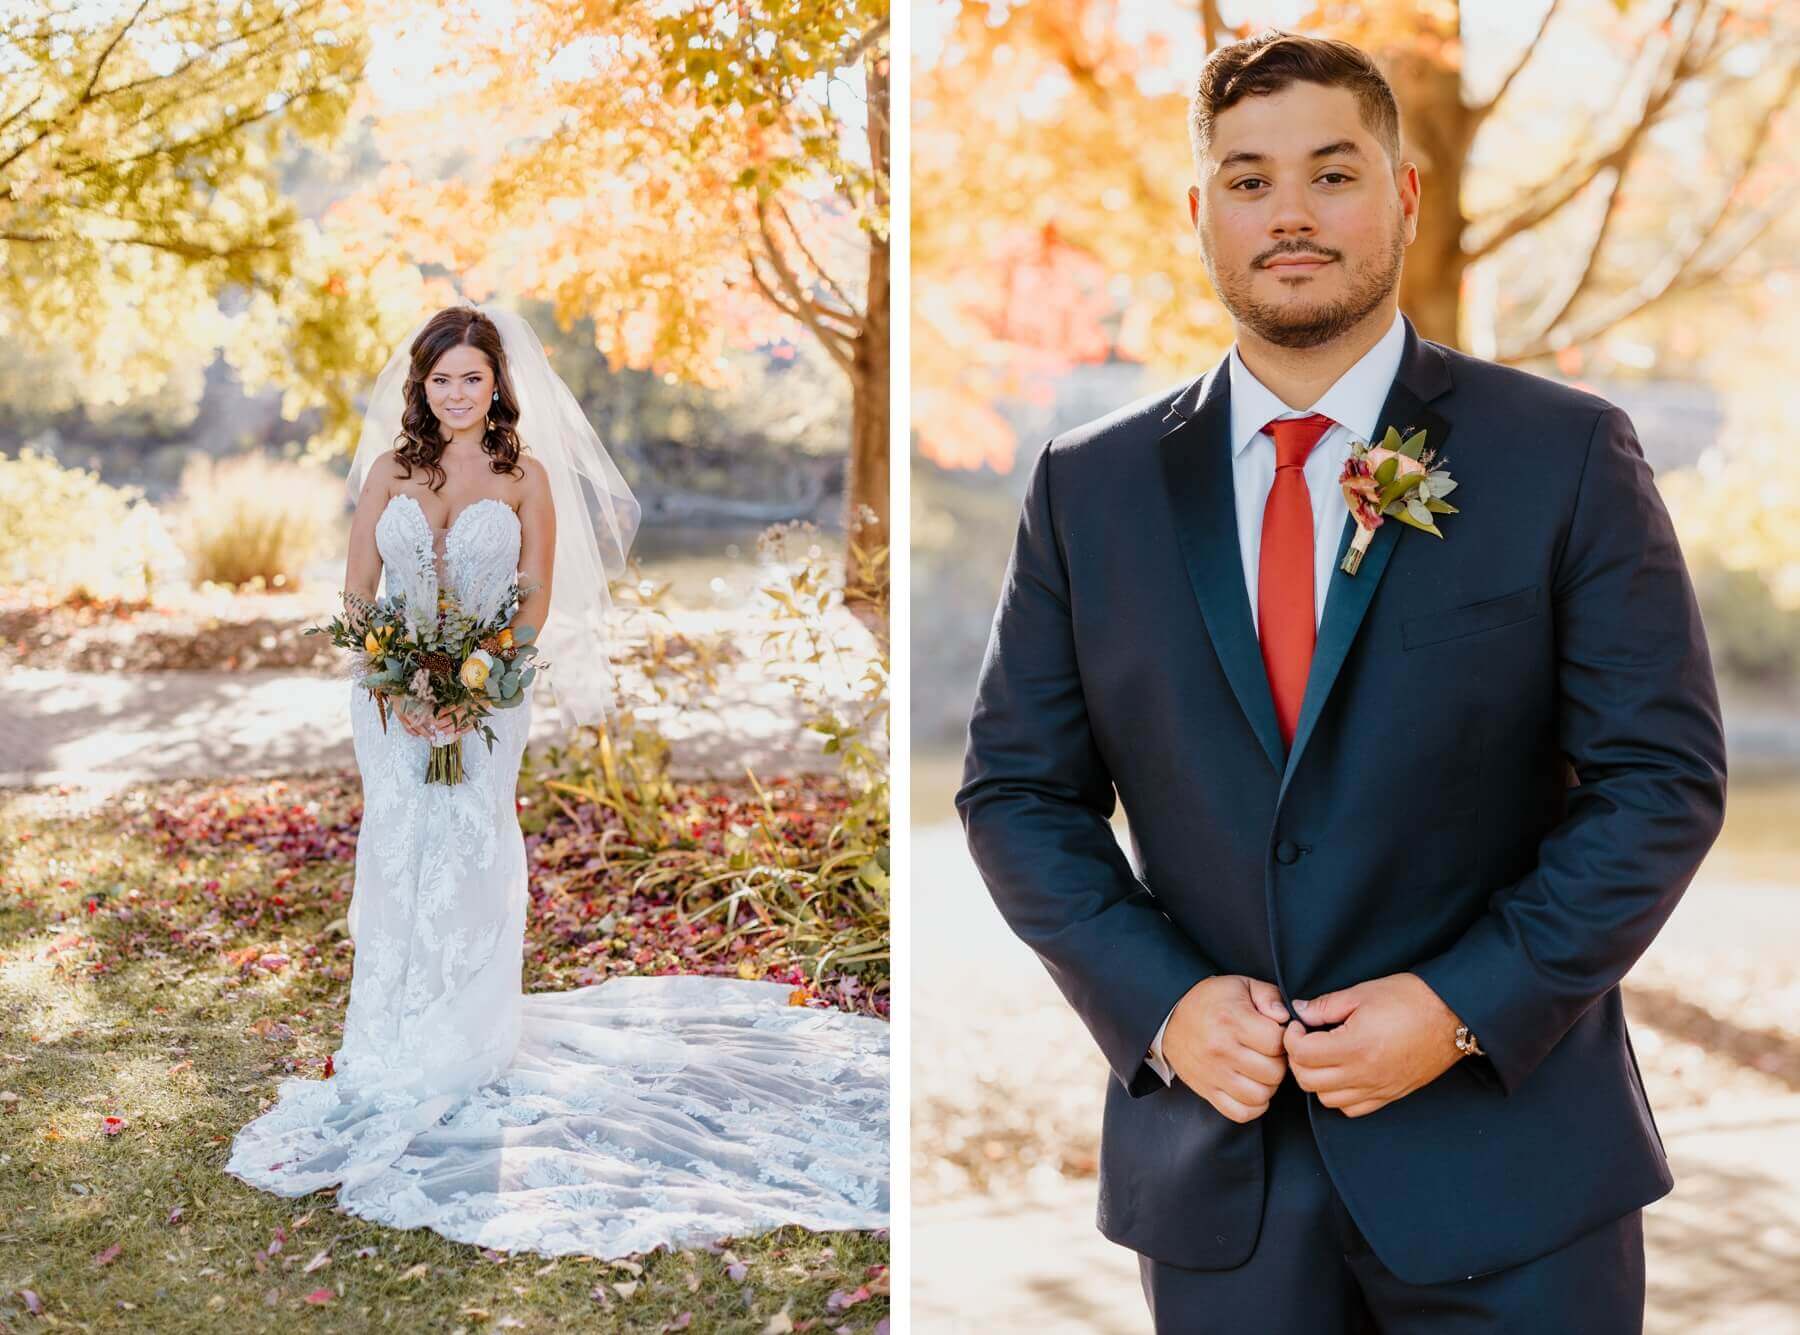 Bride wearing form fitting lace dress holding boho bouquet standing under fall trees | groom in navy blue suit with brick red tie